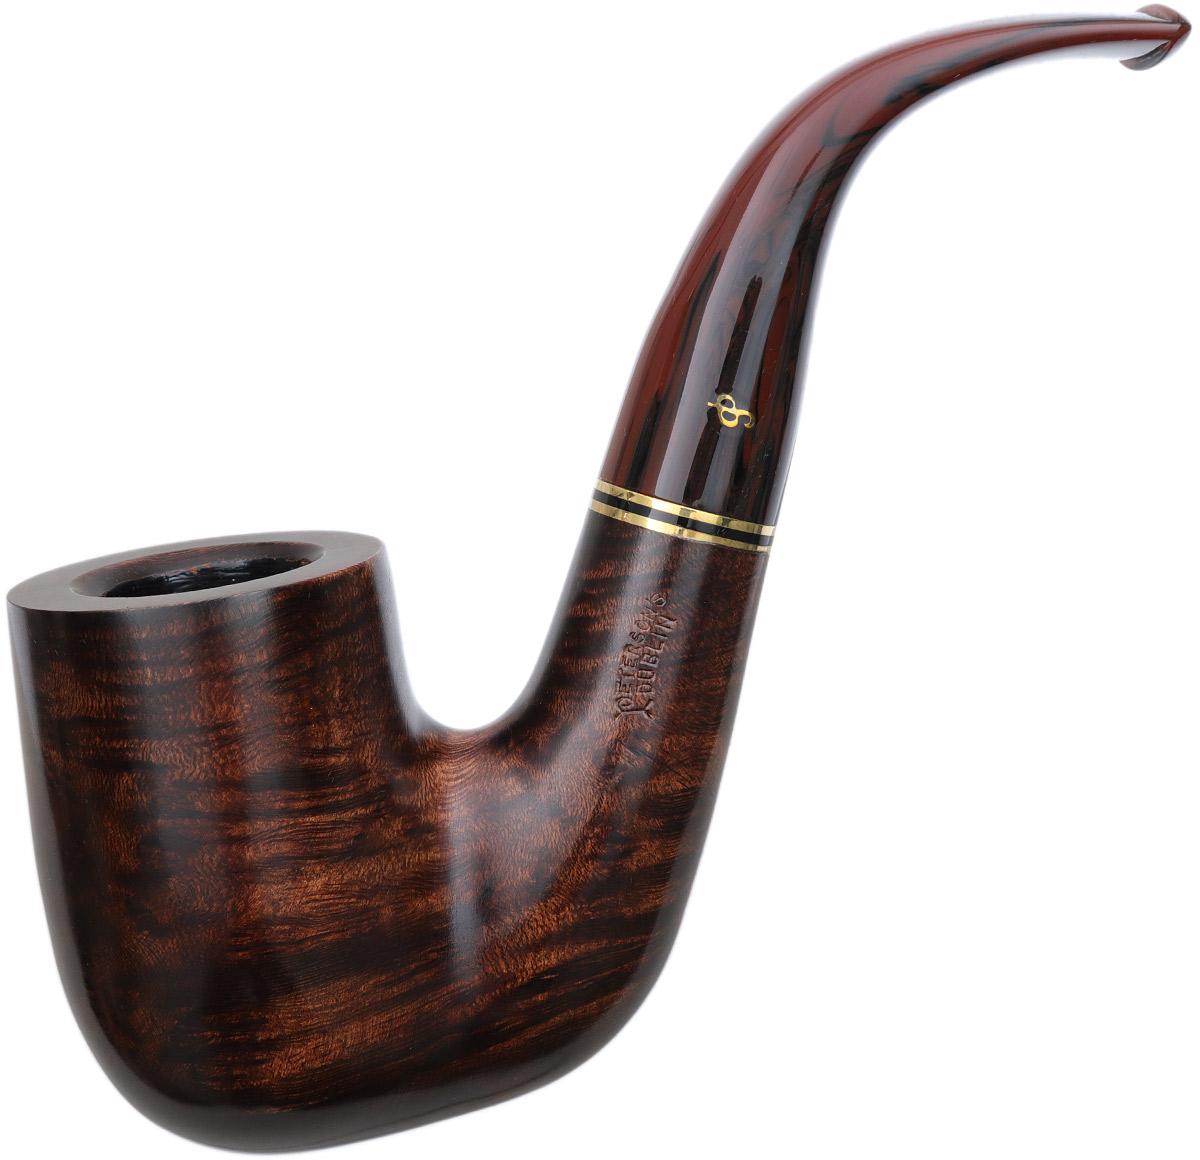 Peterson Pipe Smokers Of Ireland (60/100) 2018 D18 Fishtail